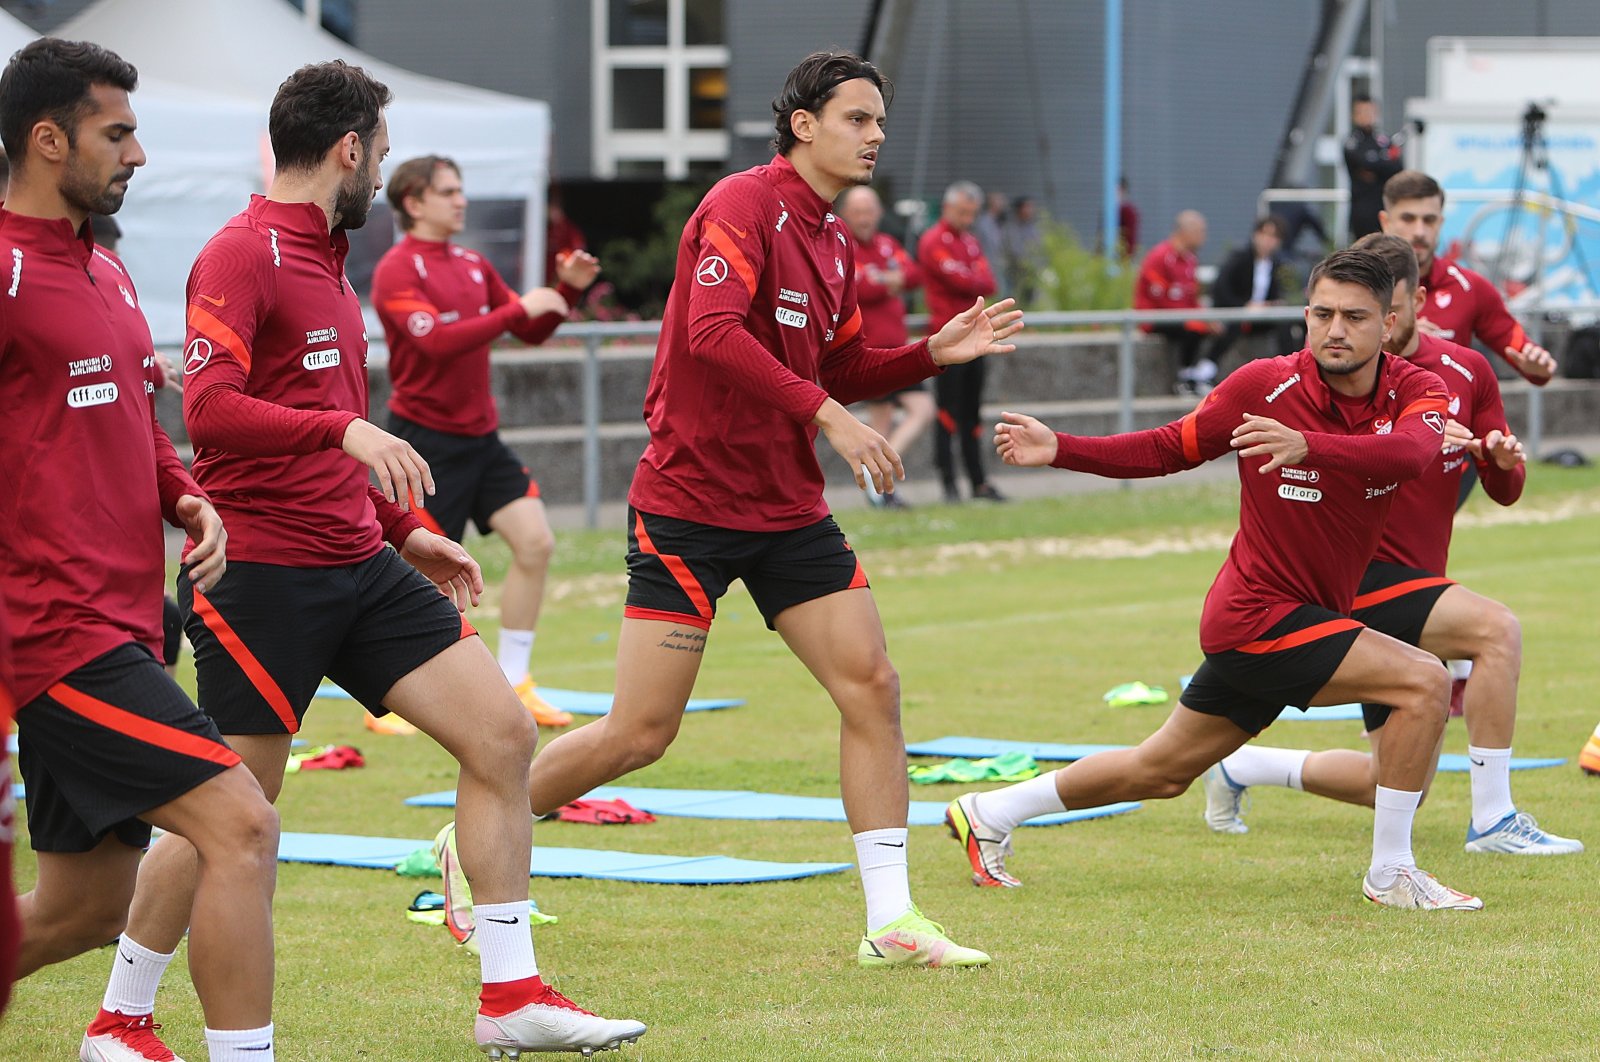 Turkey national team players train in Luxembourg ahead of their UEFA Nations League match, June 10, 2022. (IHA Photo)